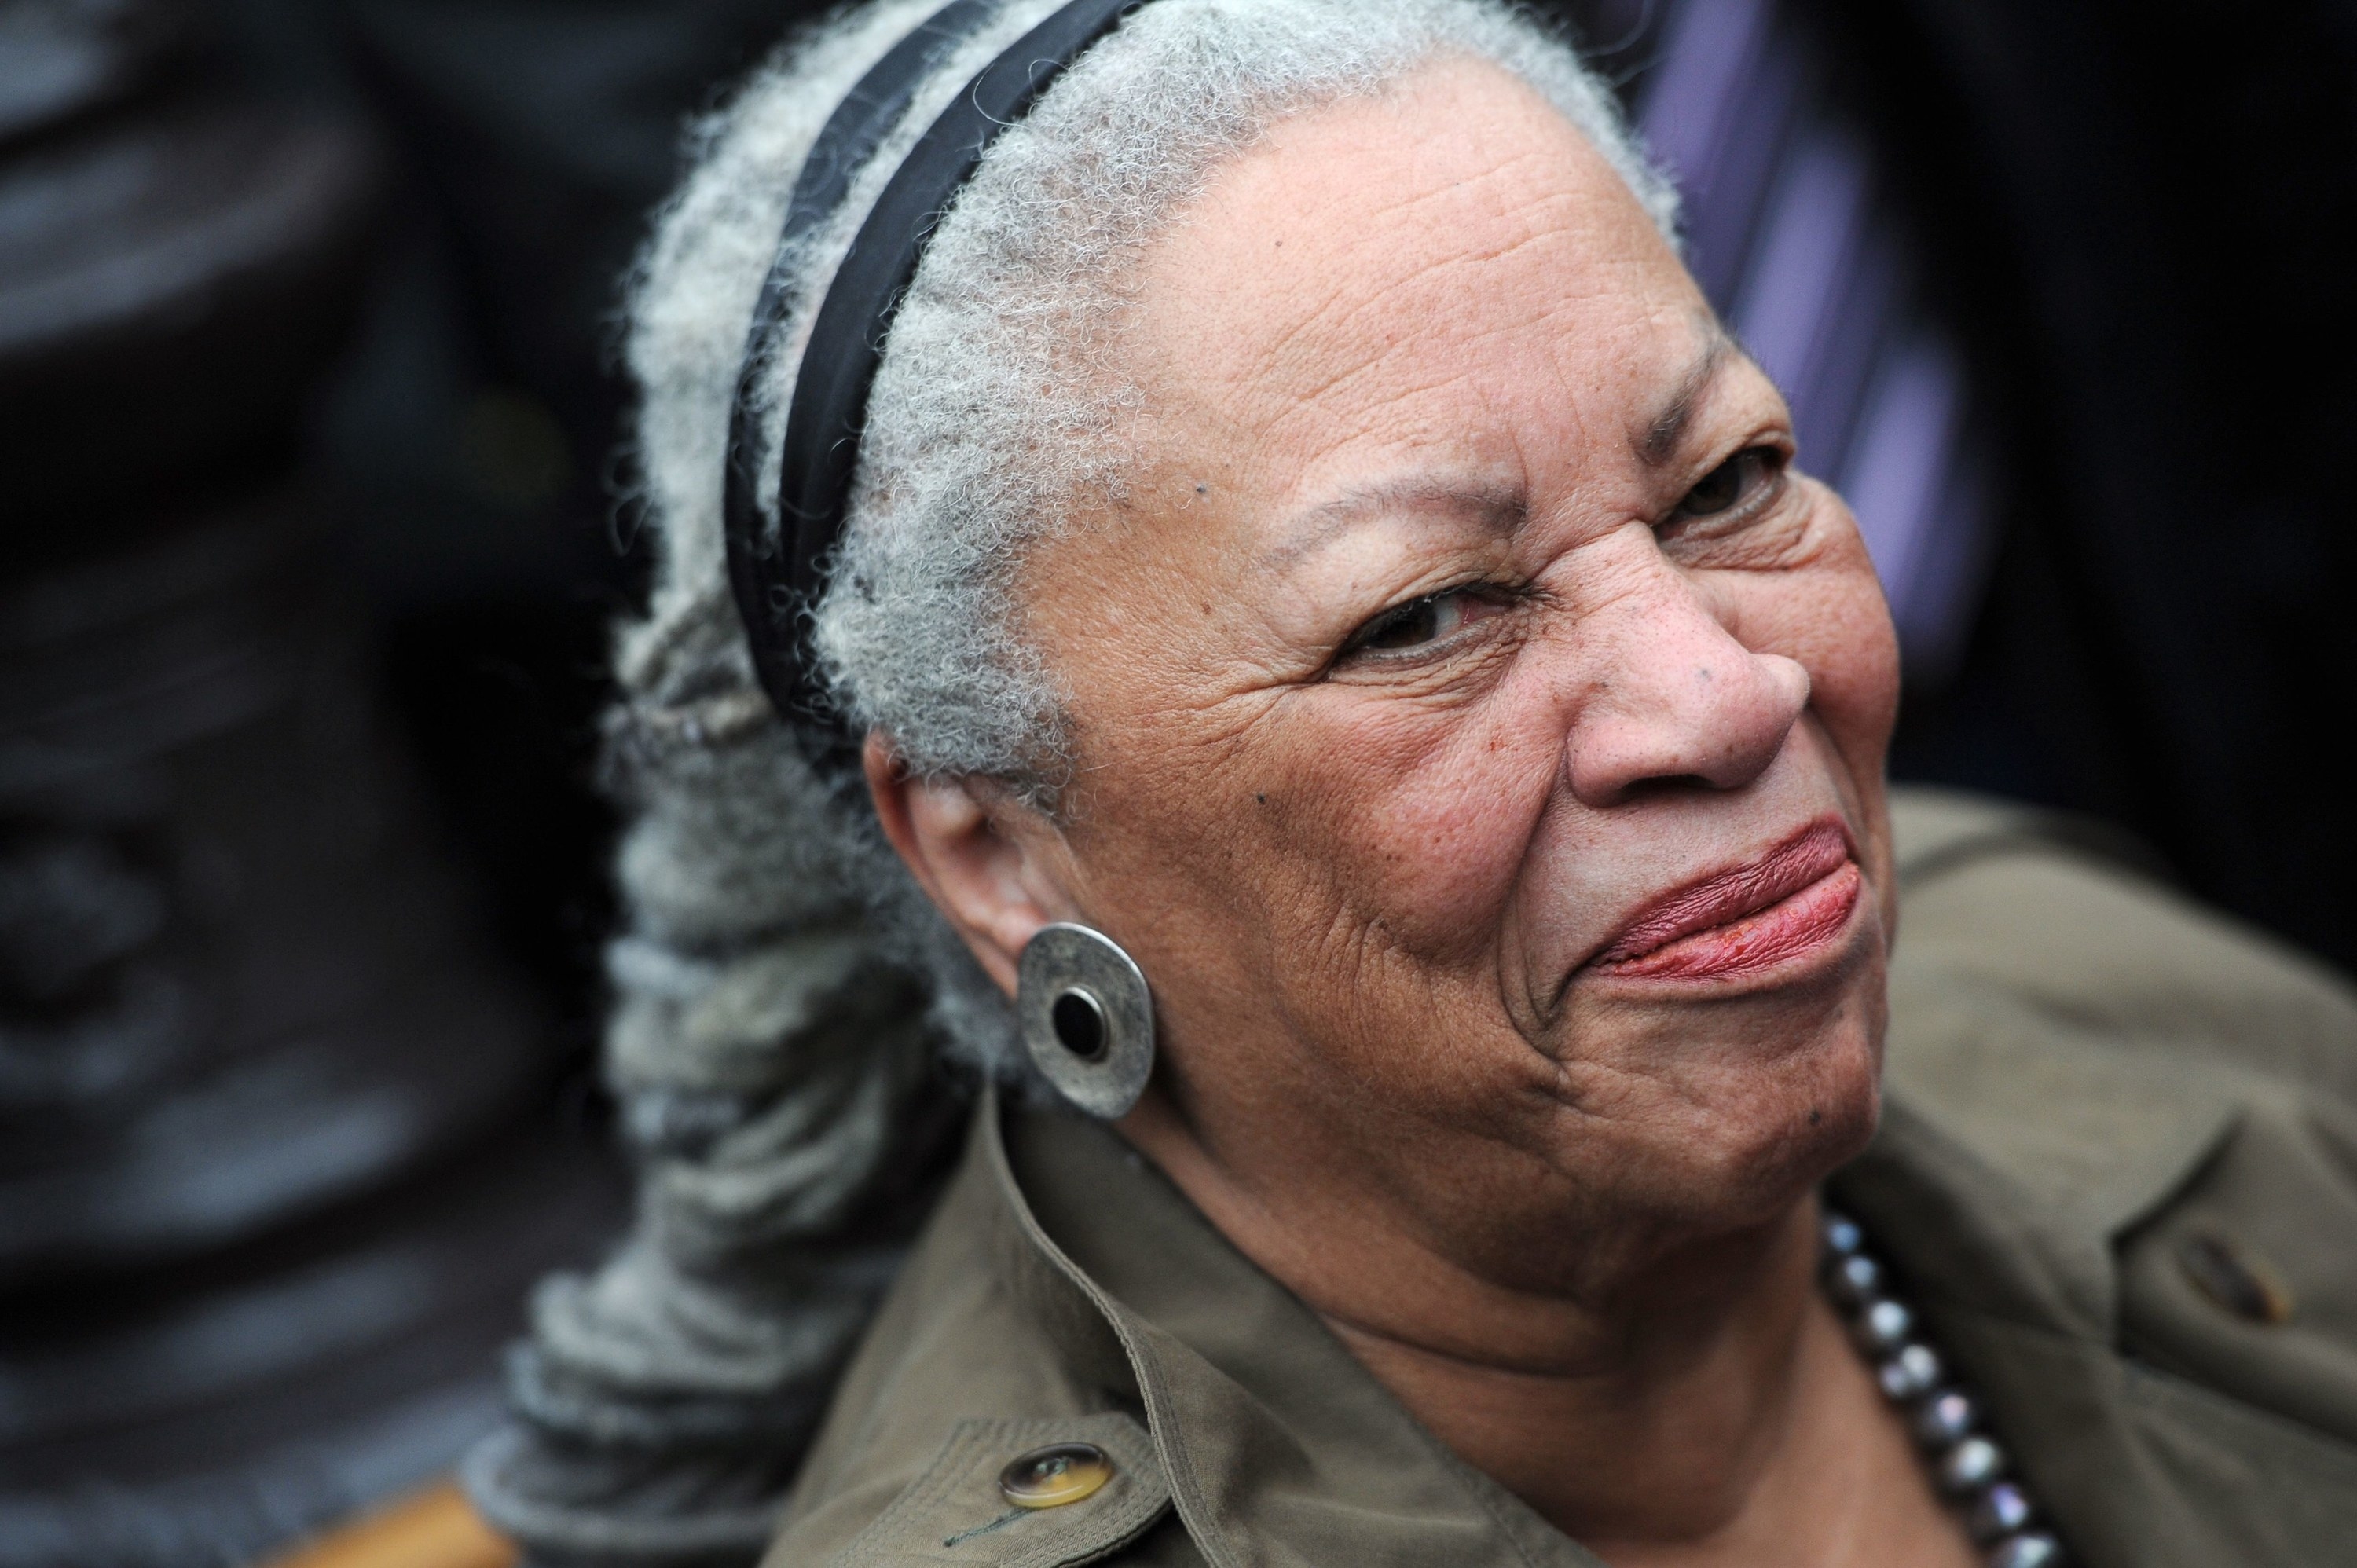 Toni Morrison witnesses the unveiling of a memorial bench to remember the abolition of slavery in Paris in 2010